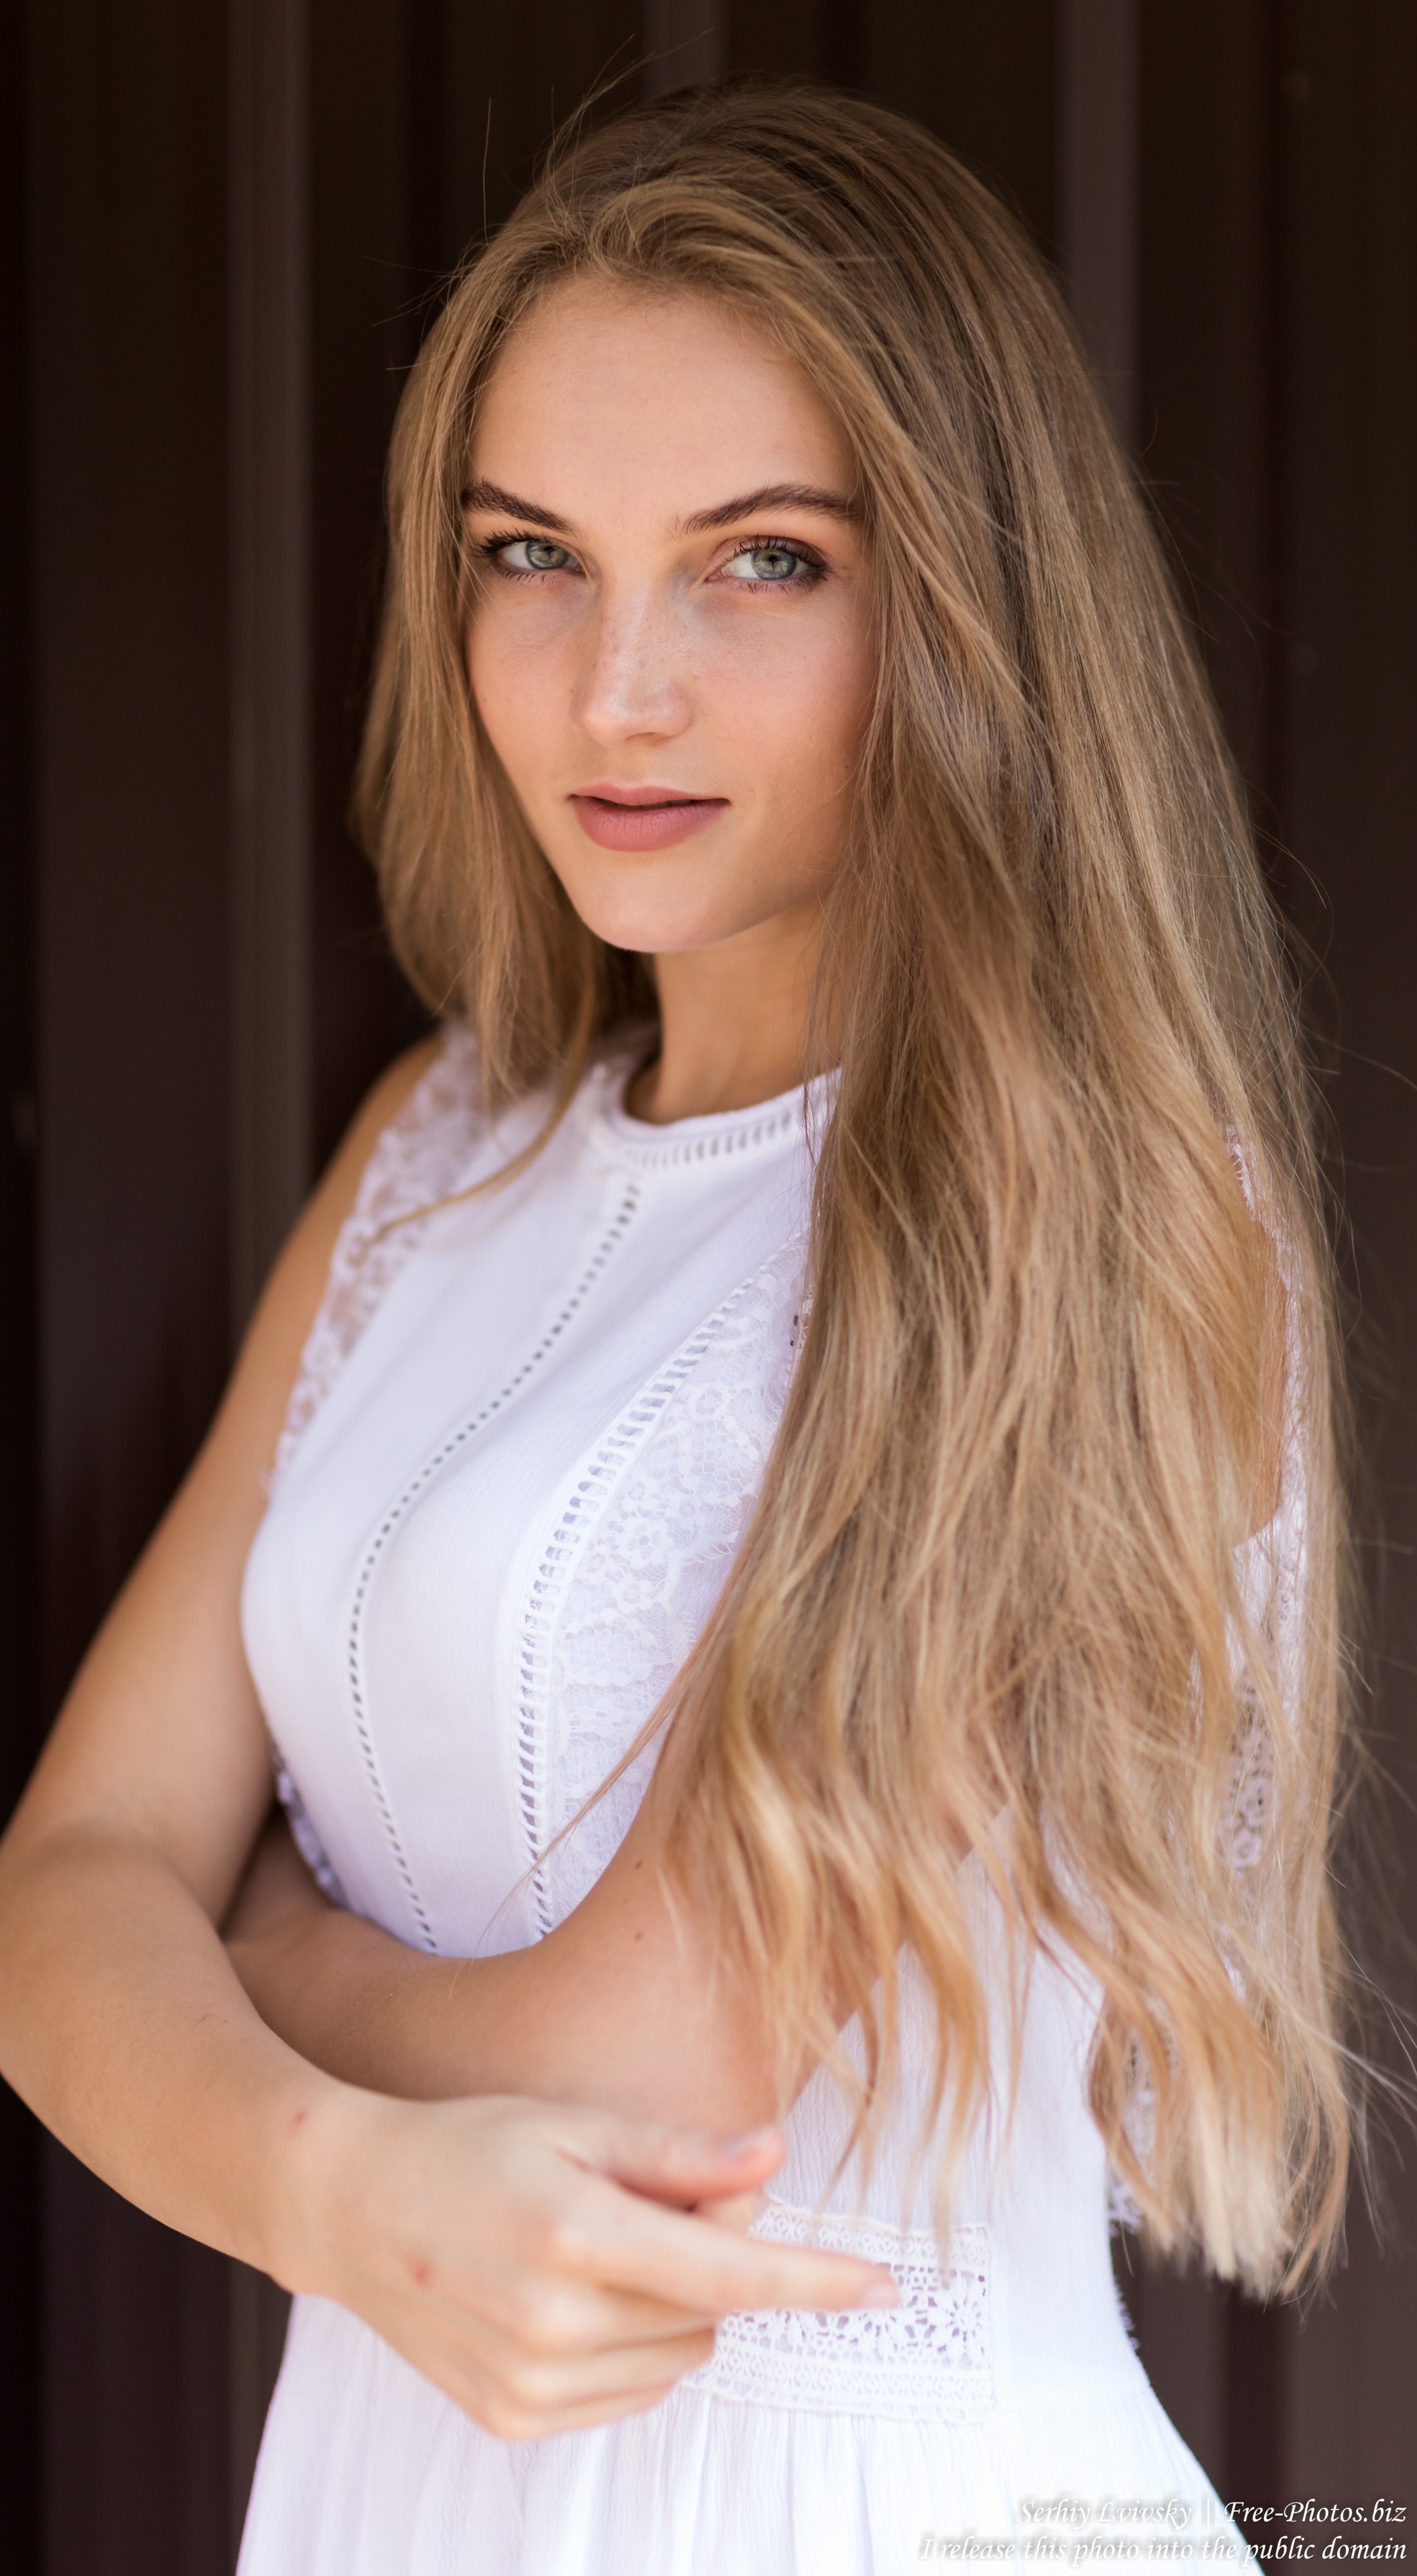 Yaryna - a 21-year-old natural blonde Catholic girl photographed in August 2019 by Serhiy Lvivsky, picture 27